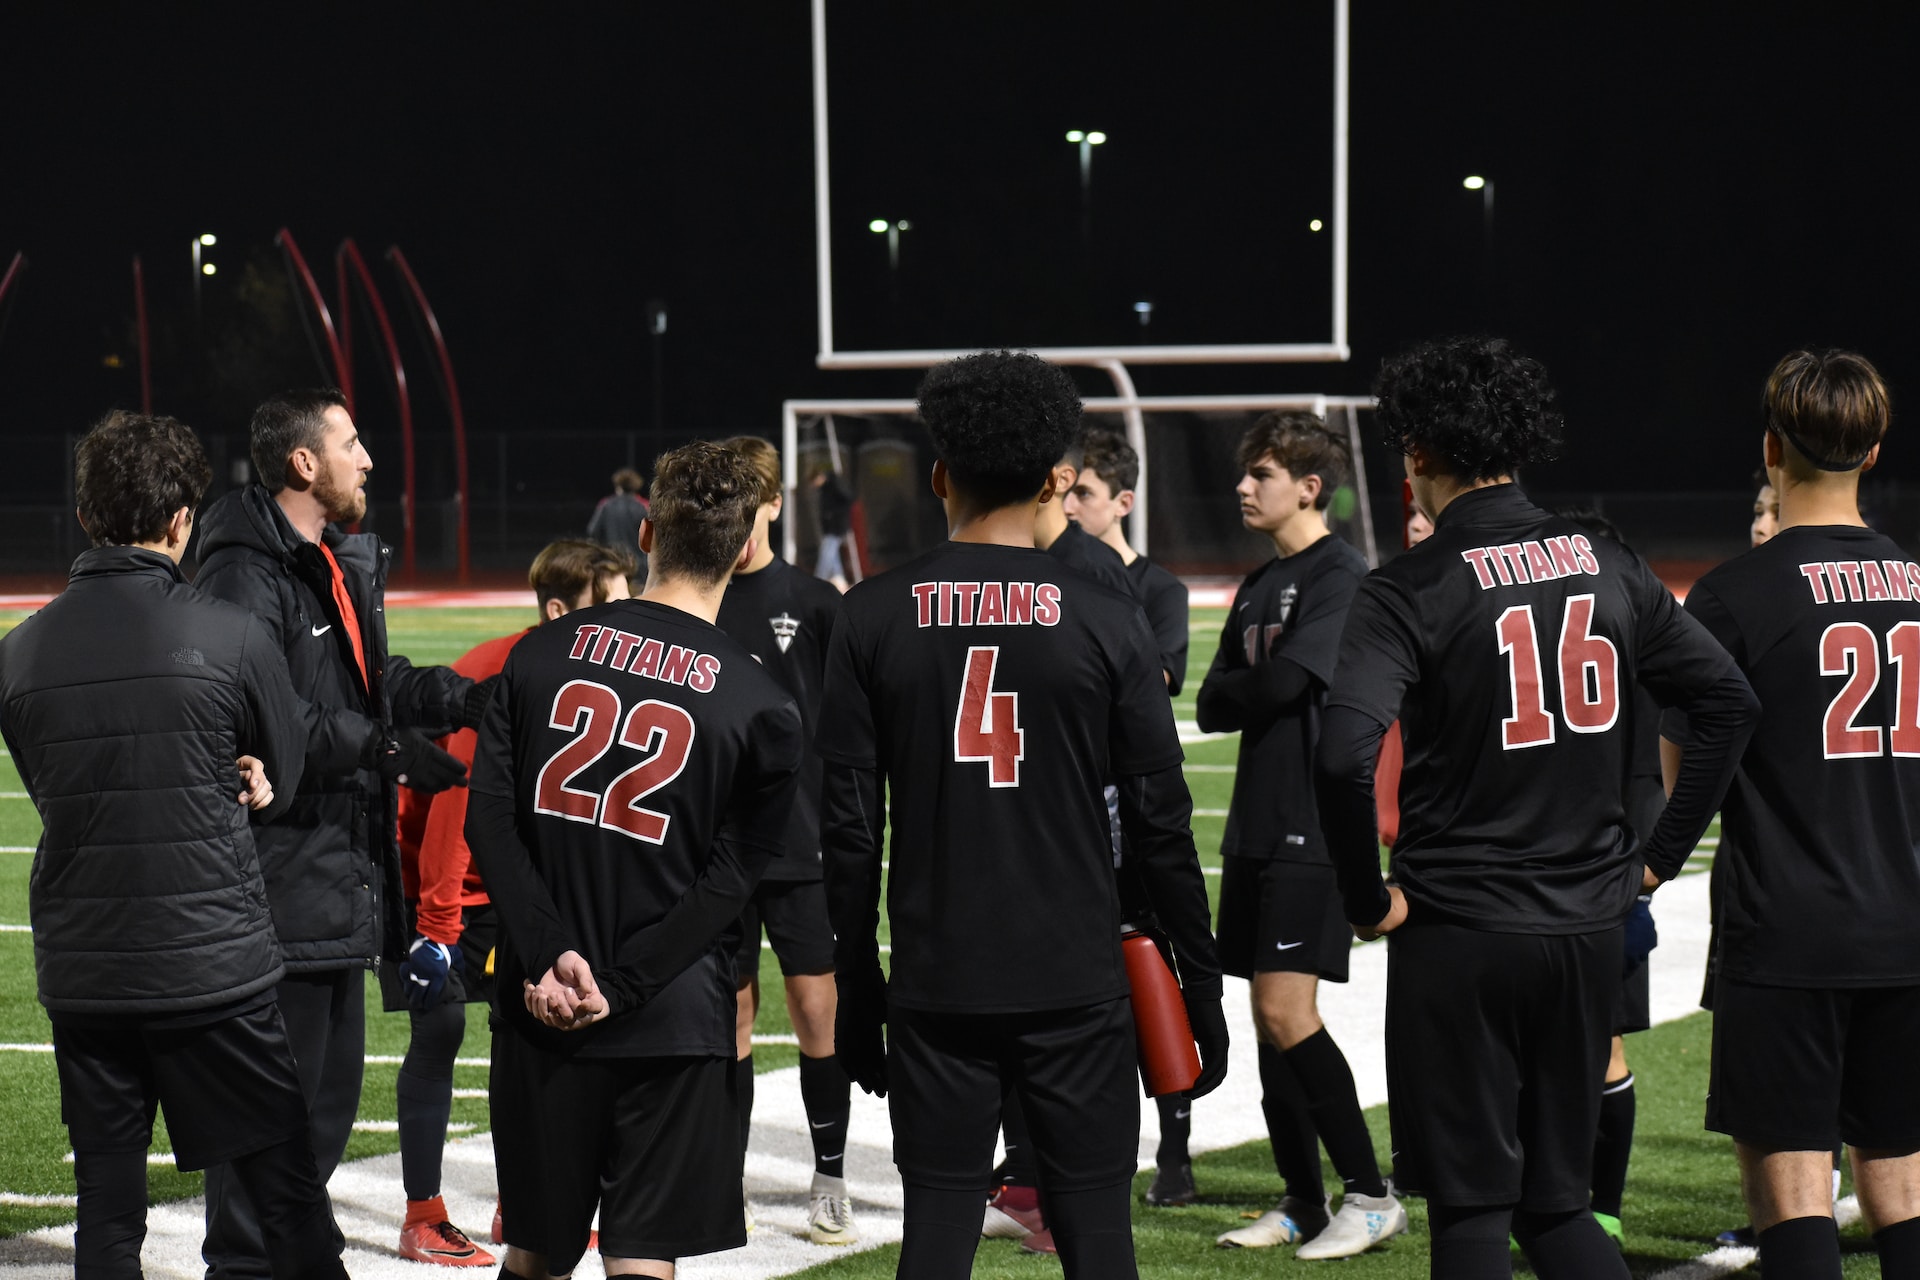 A male coach talking to his team on a sports field. It is night time and the field is lit with flood lights. The team are all young males of different races wearing black team kit and TITANS on the back of their shirts.